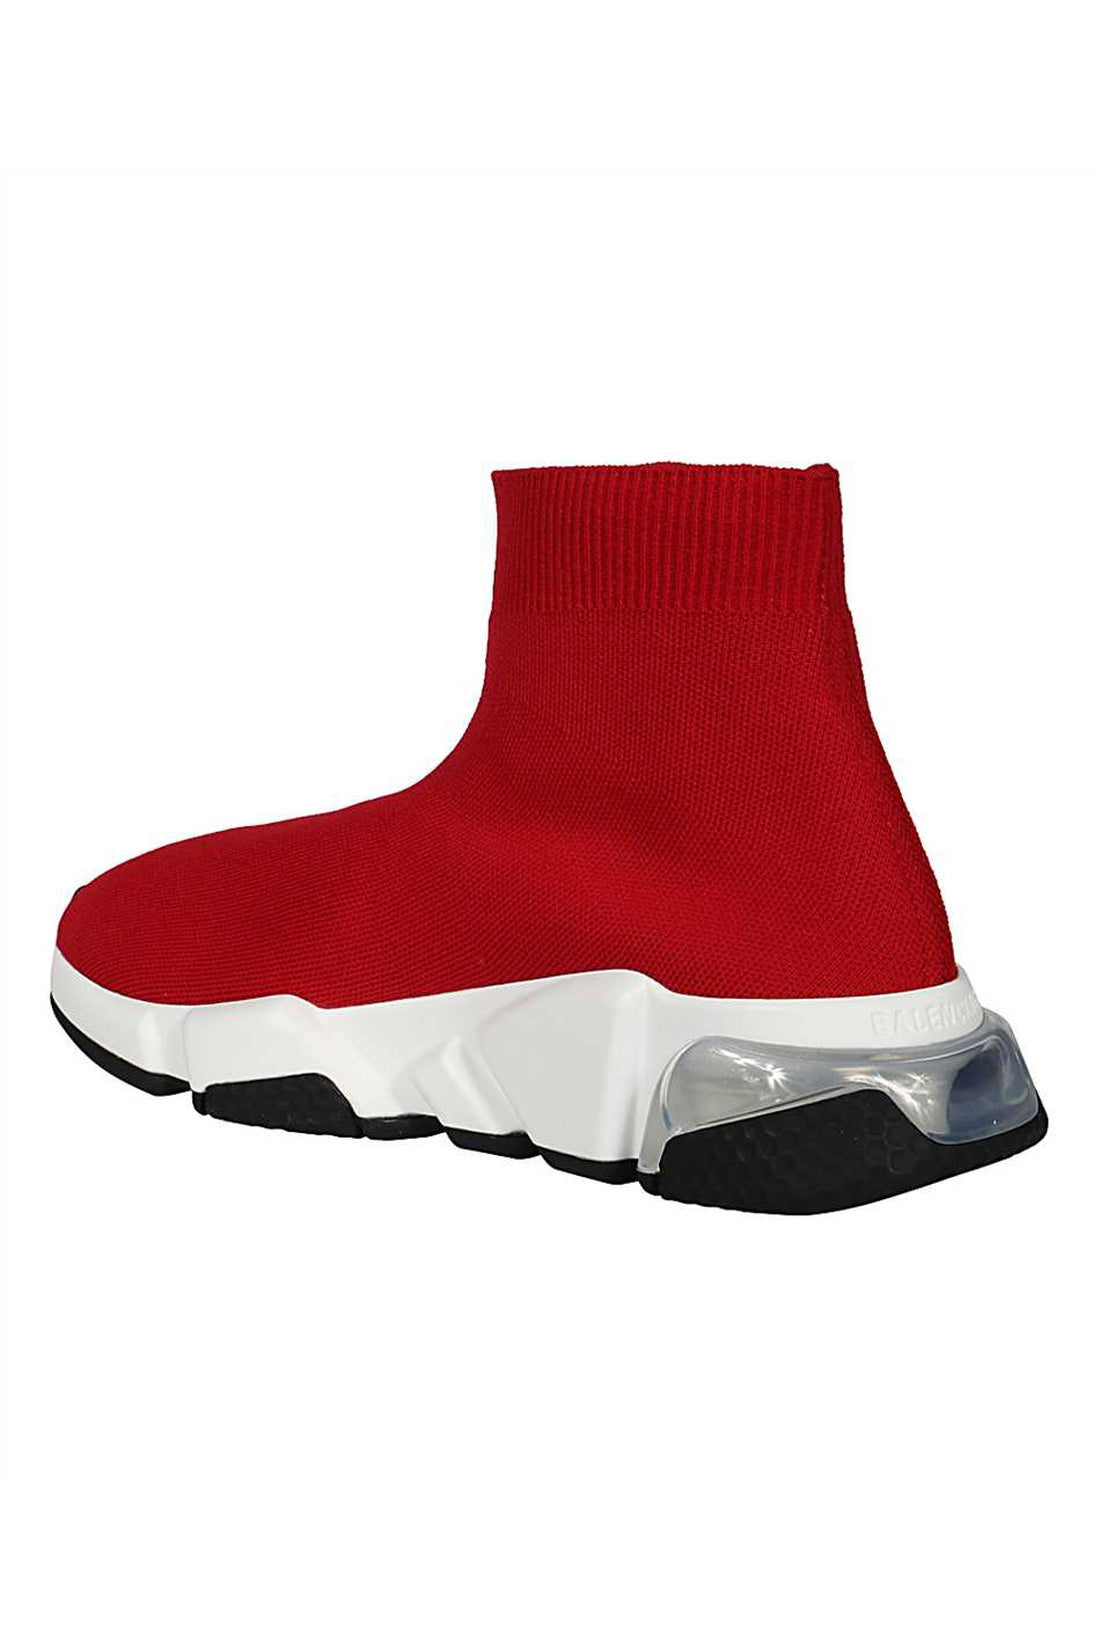 Balenciaga-OUTLET-SALE-Speed knitted sock-sneakers-ARCHIVIST